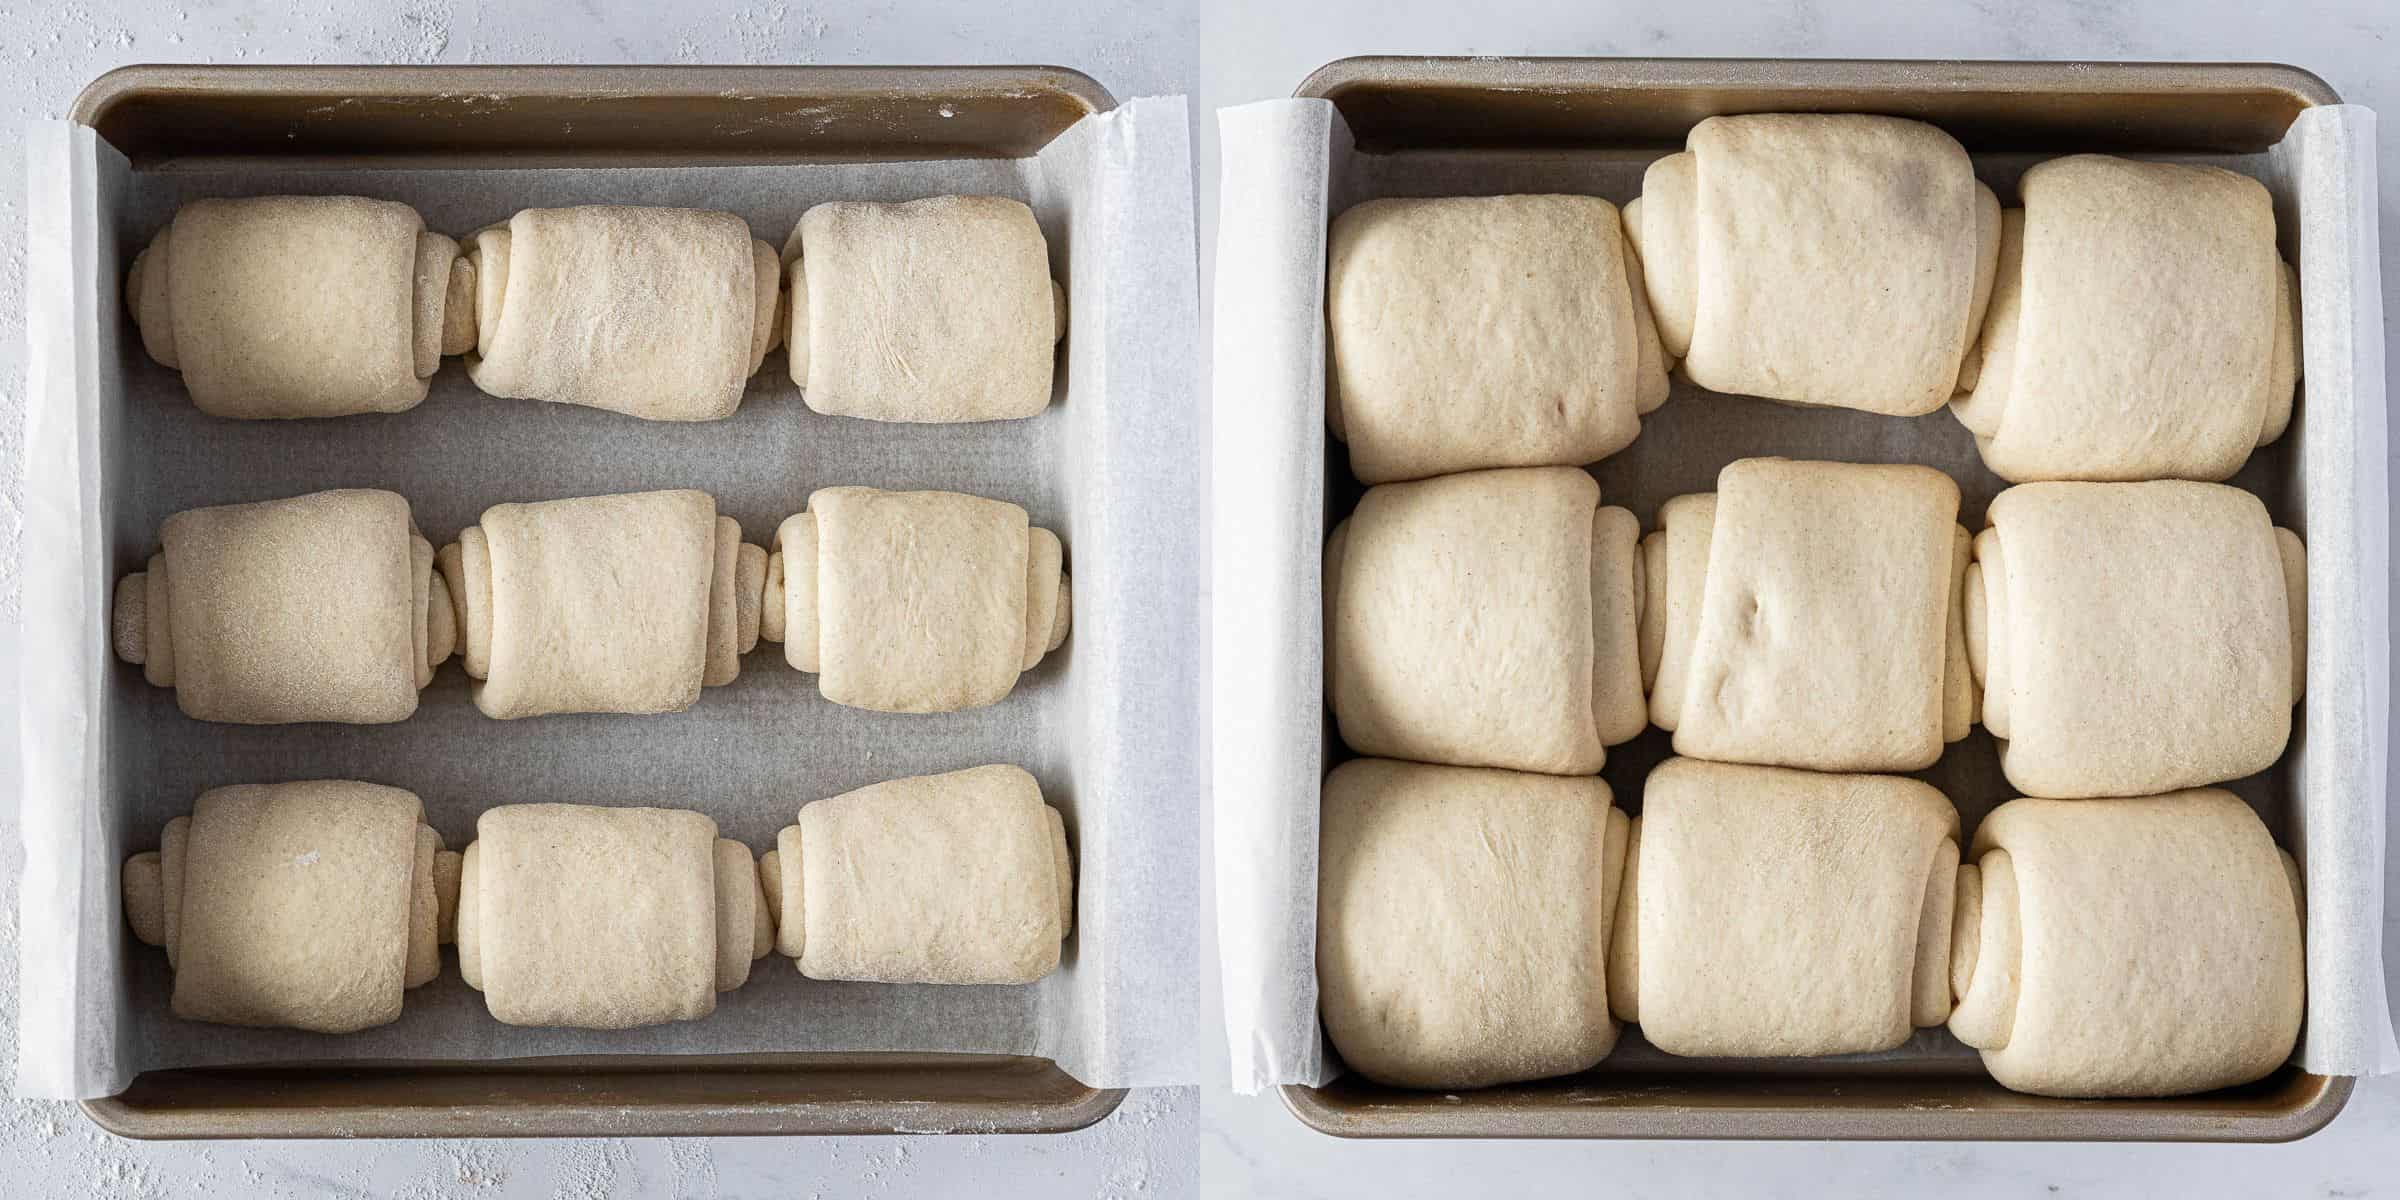 Step 6, the rolls before and after rising.